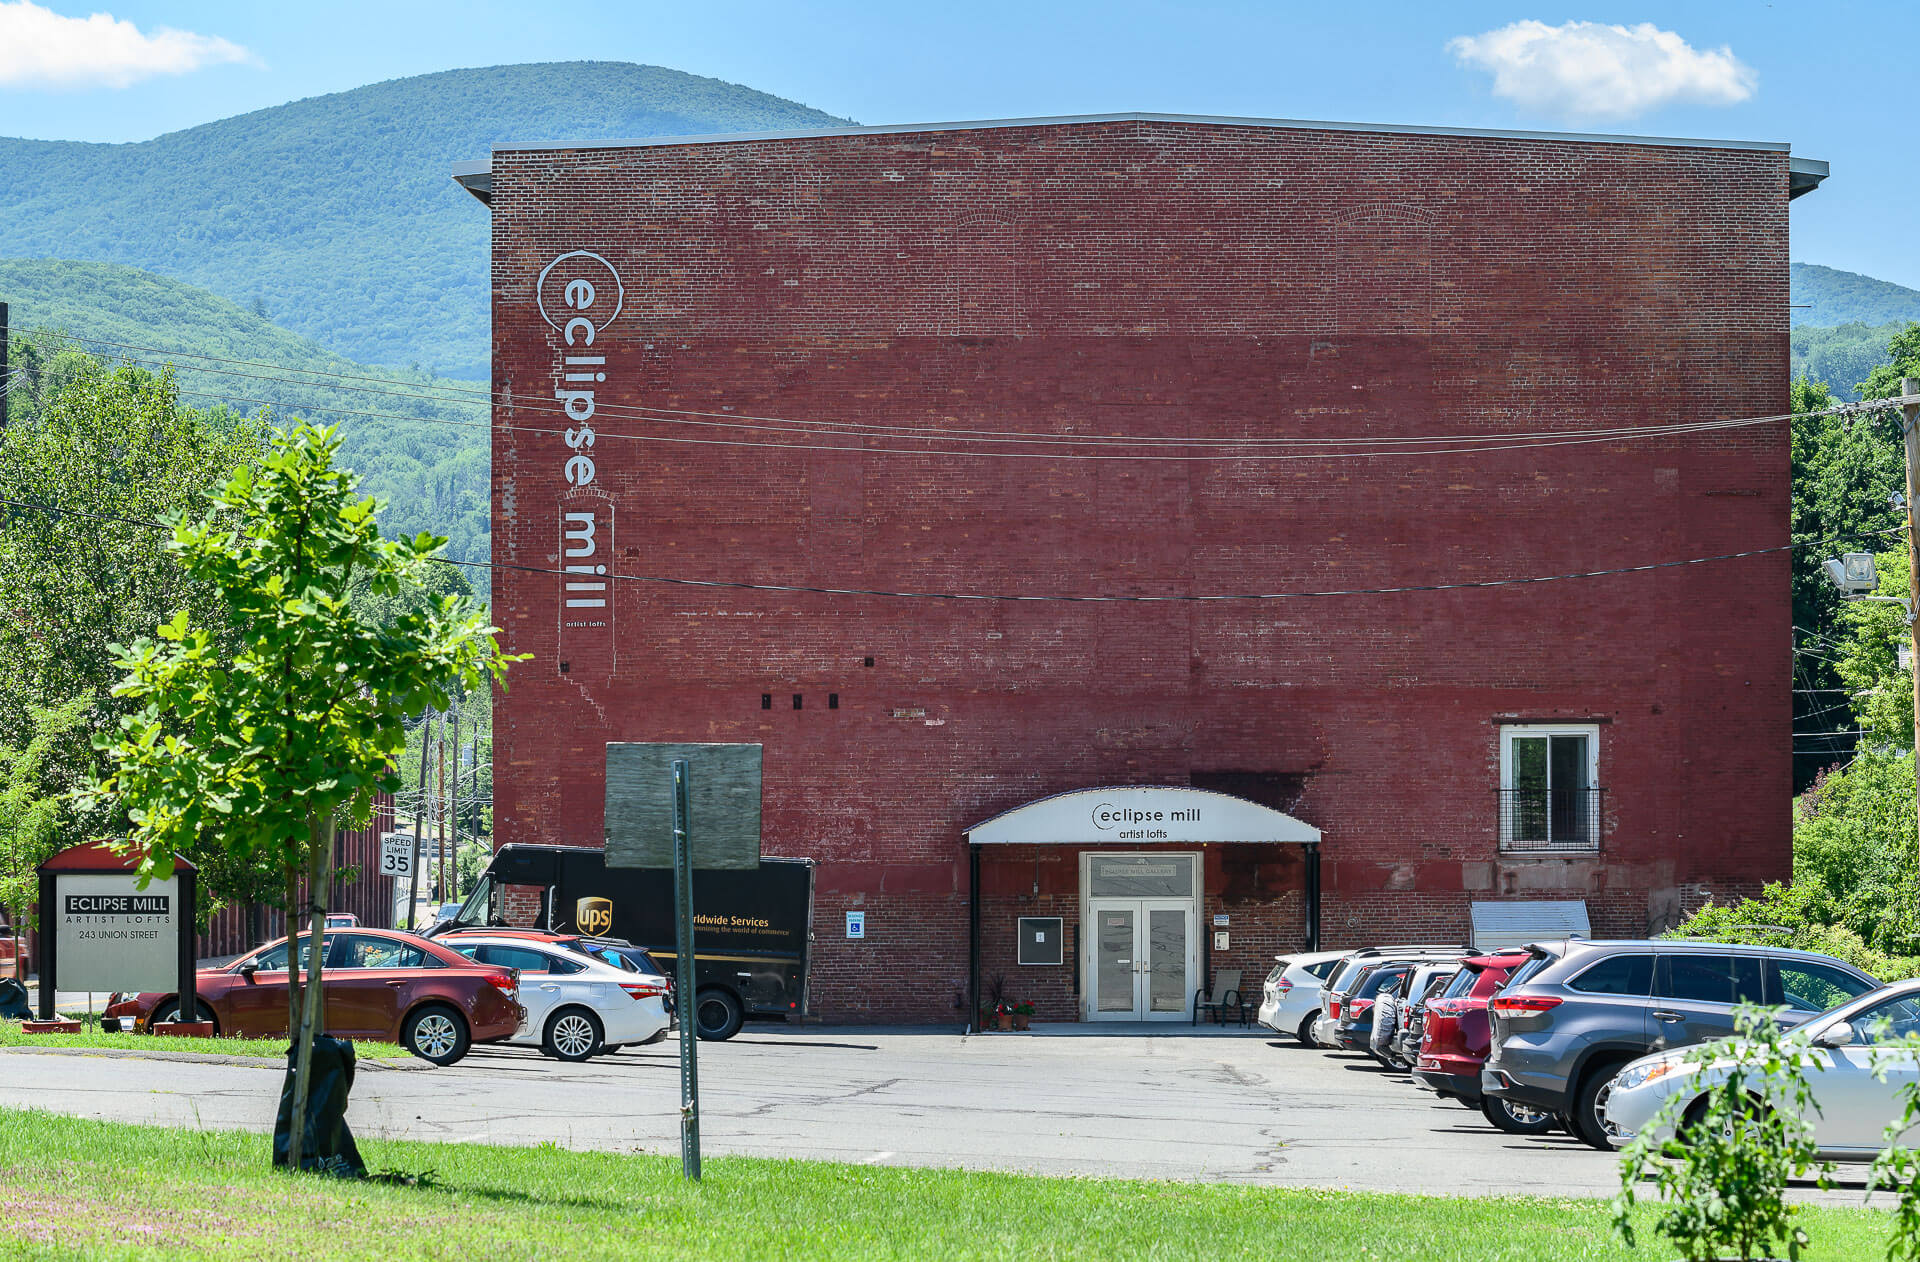 A picture of the red brick entrance wall of the Eclipse Mill, with the mountains in the background